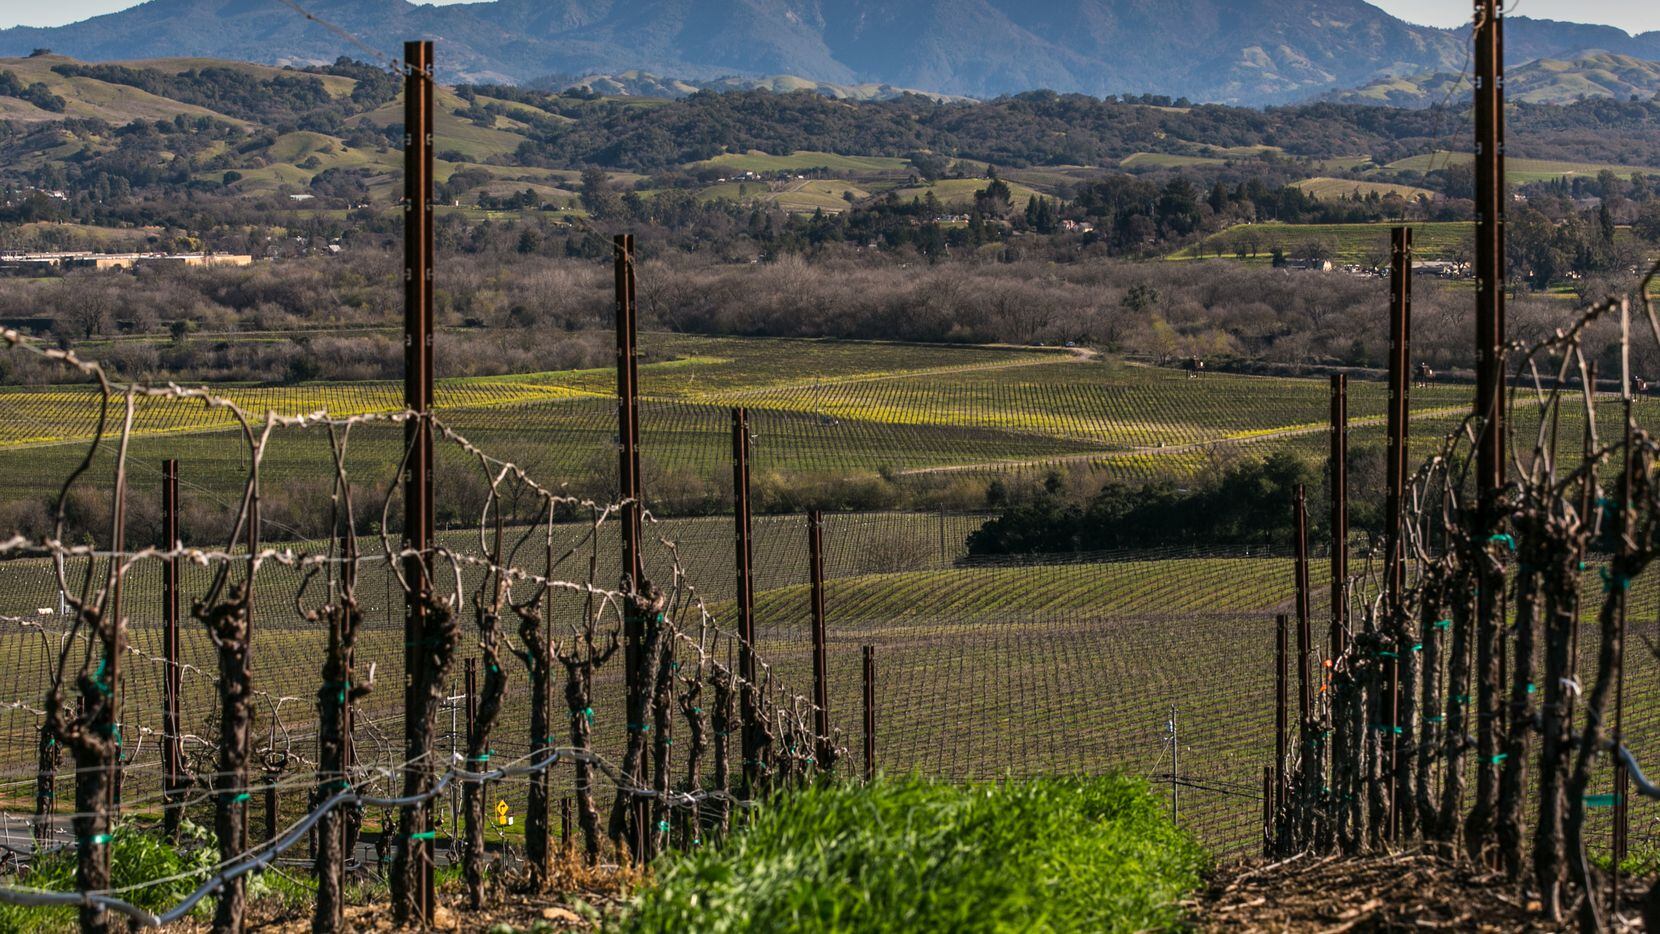 The inaugural Healdsburg Wine & Food Experience in California in May 2022 will highlight...